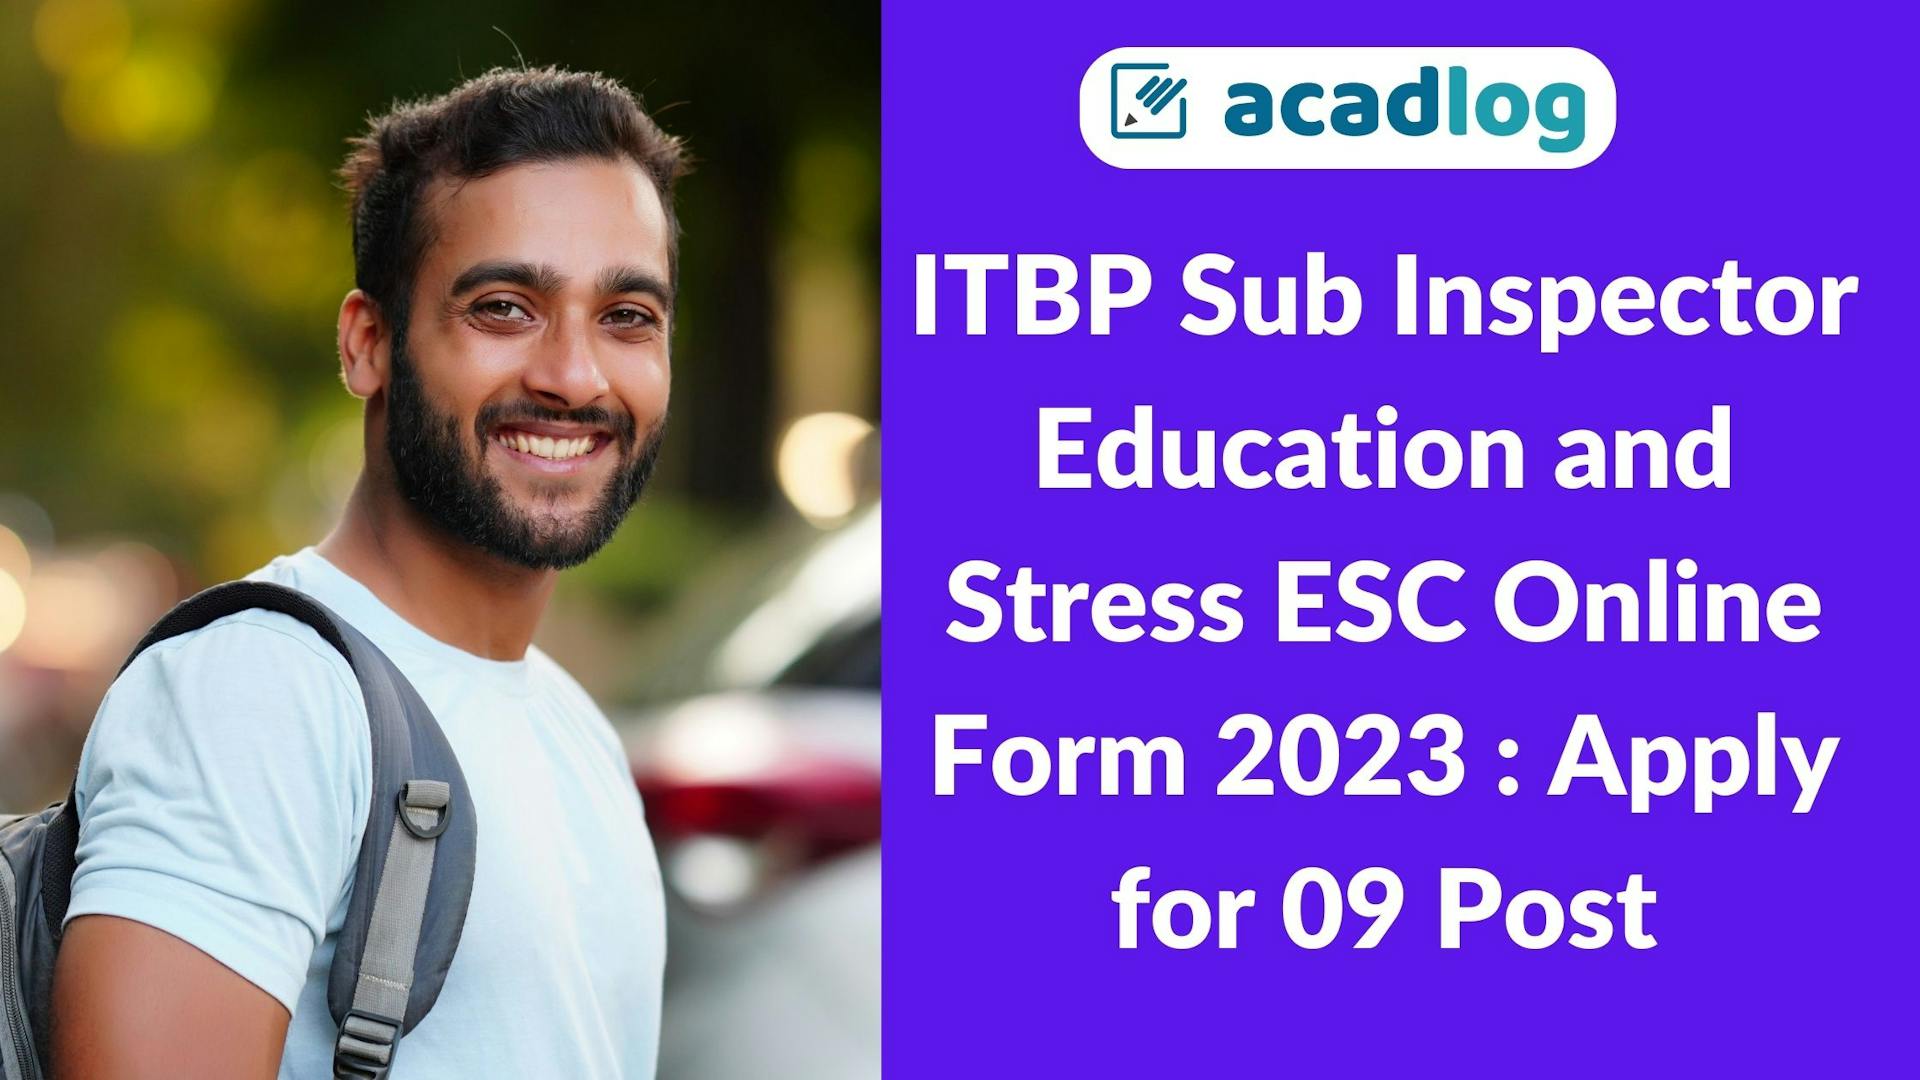 Acadlog: ITBP Sub Inspector SI Education and Stress Counsellor Recruitment 2023 Apply Online for 09 Post